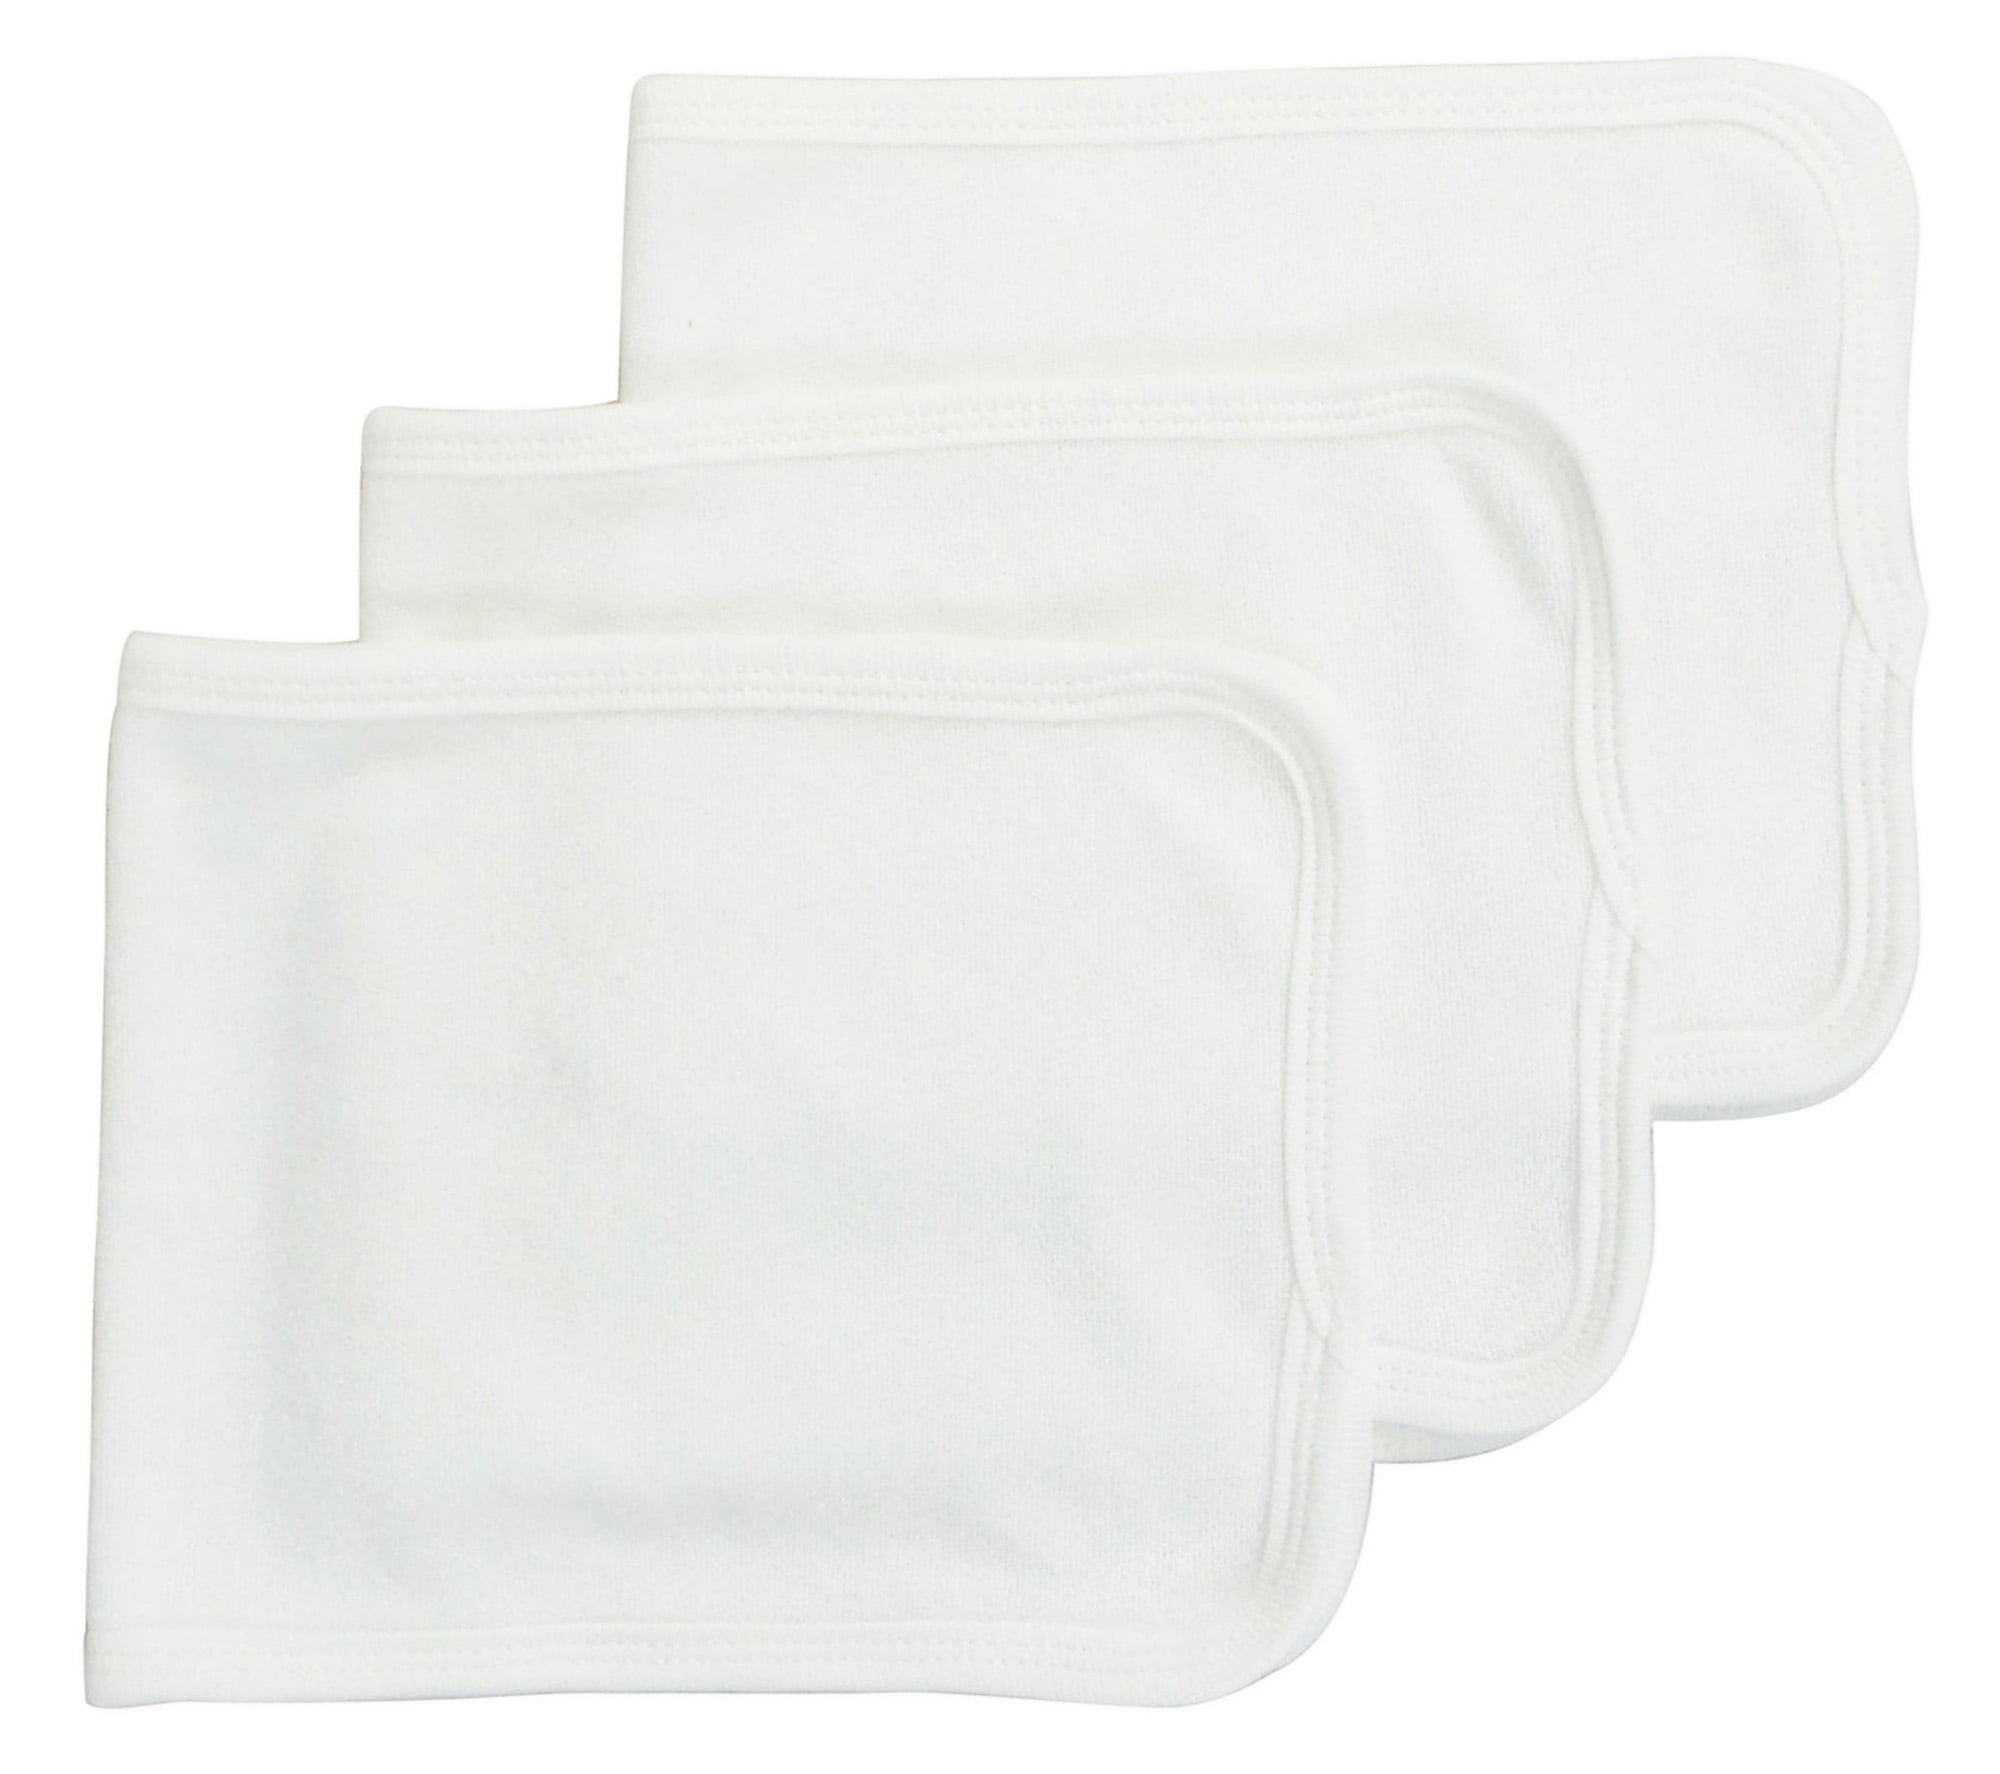 Picture of Bambini 1025-W-3 12.25 x 7.5 in. Baby Burpcloth with White Trim - Pack of 3